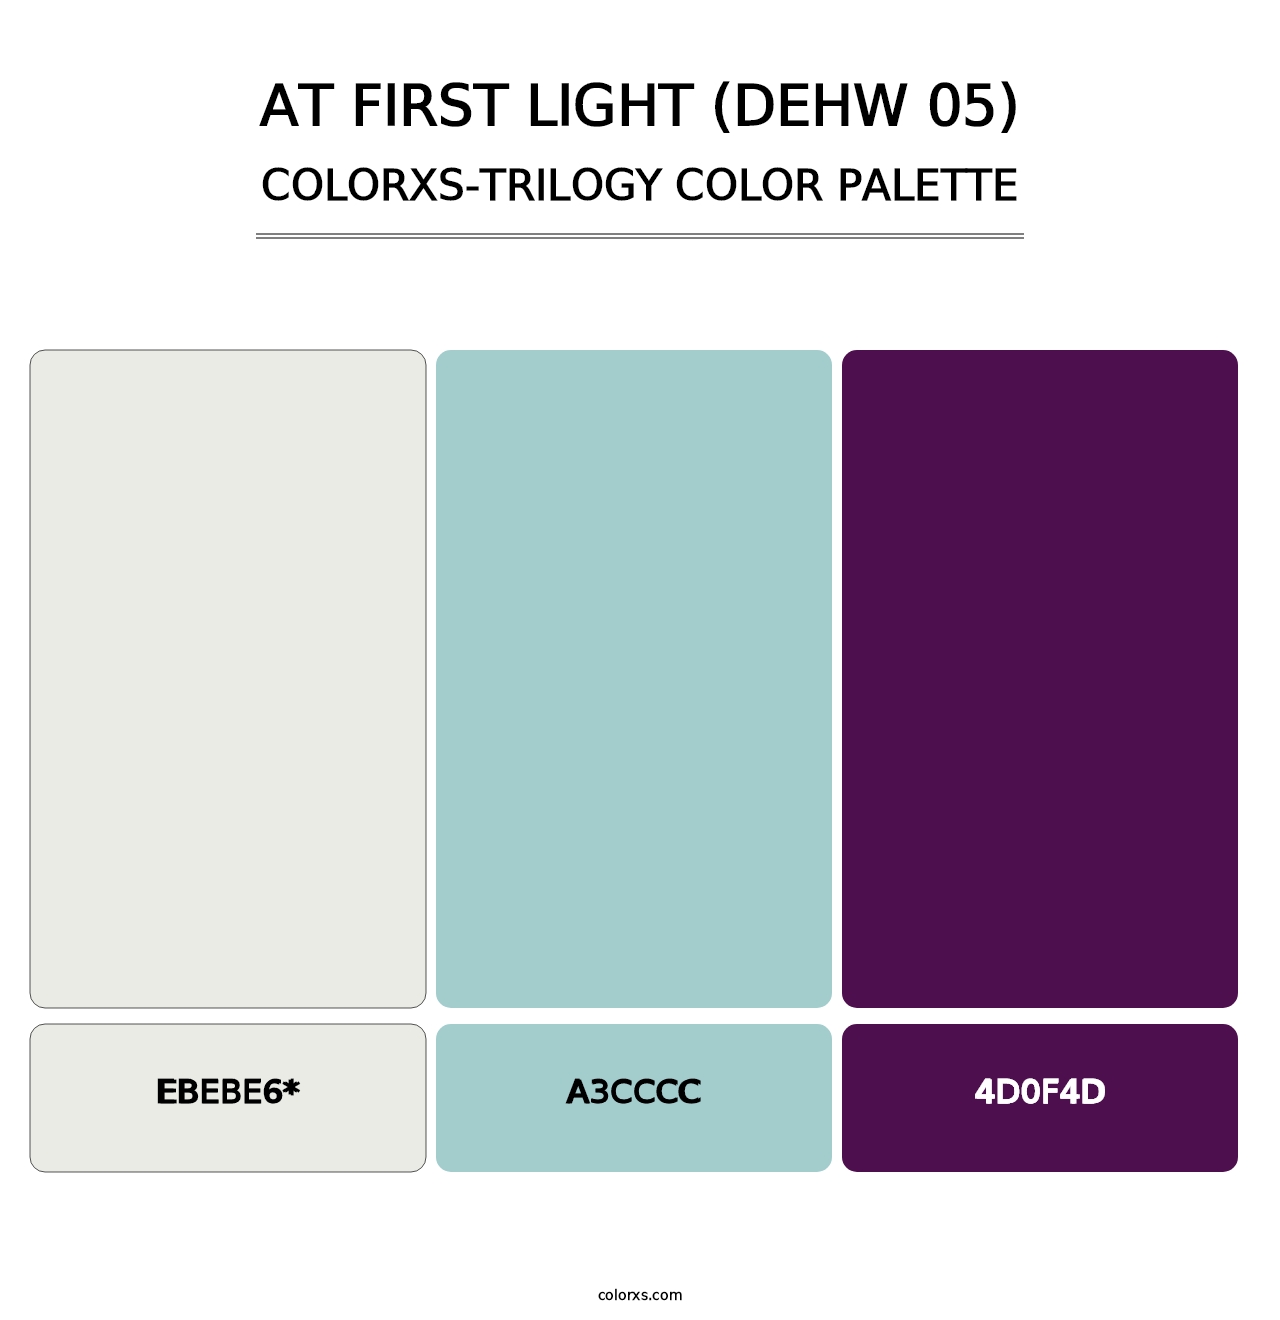 At First Light (DEHW 05) - Colorxs Trilogy Palette